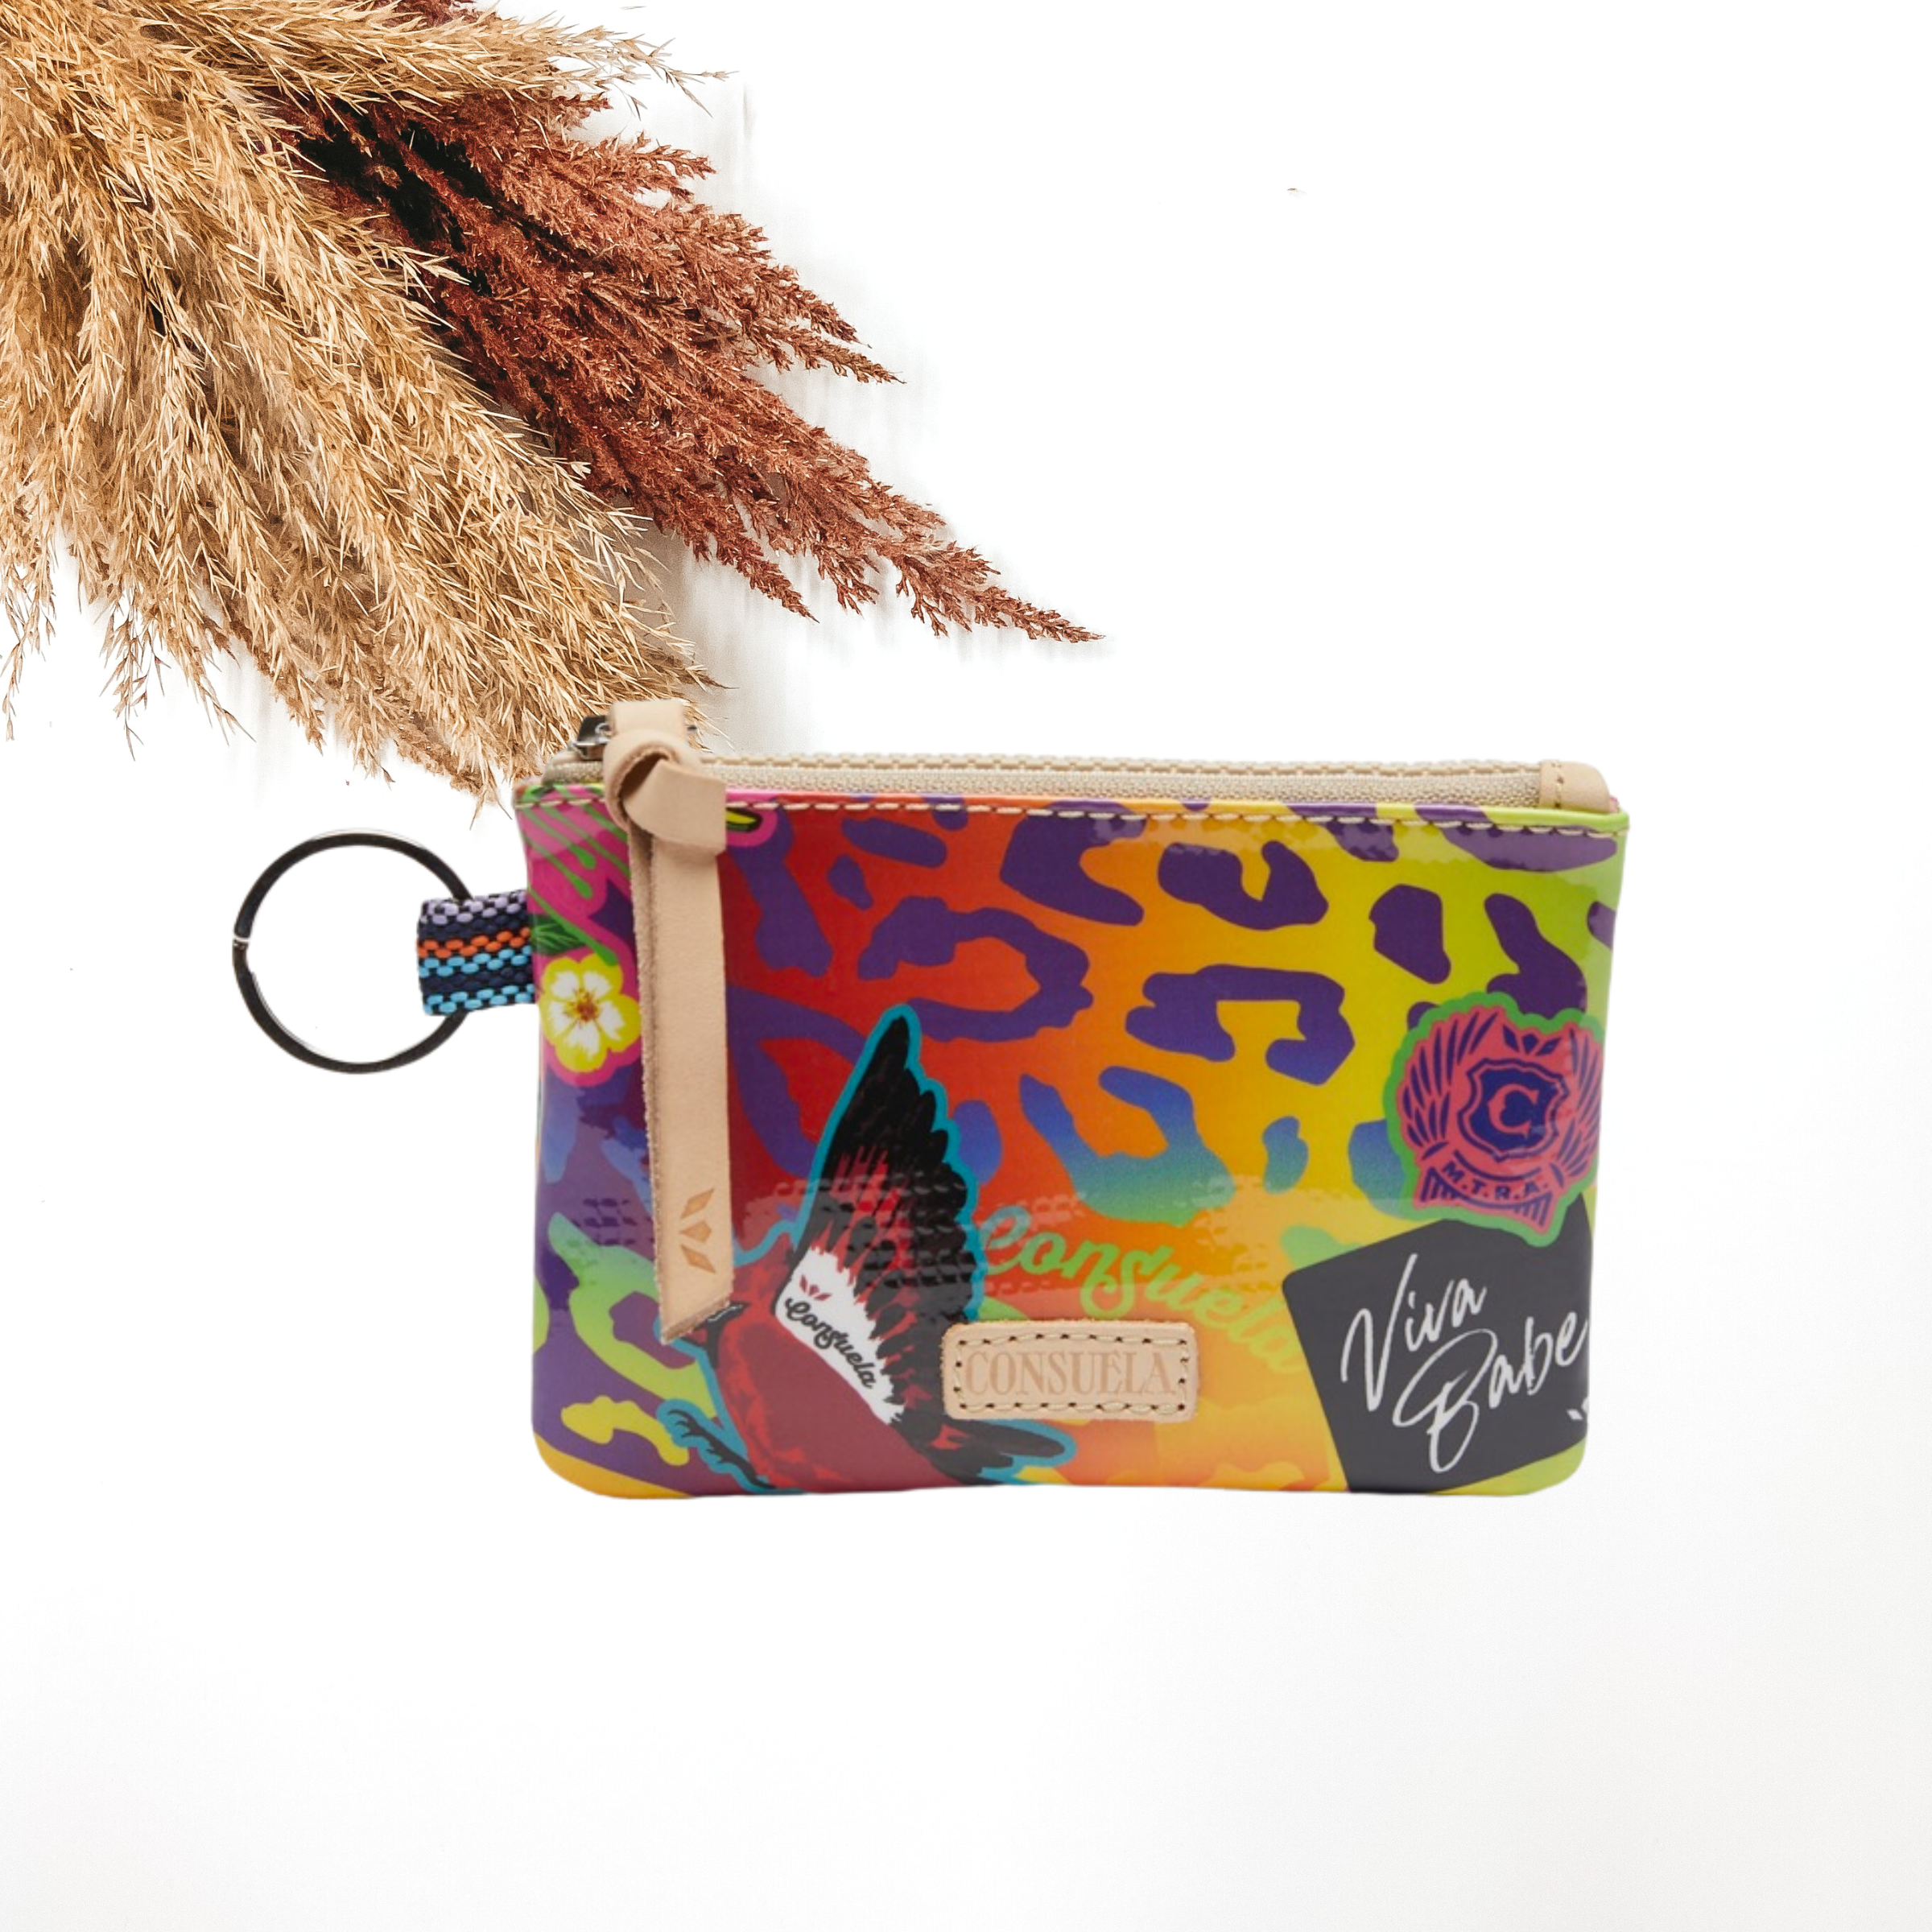 Small, rectangle pouch with a silver key ring on the left side and a light tan zipper pull. This pouch has a multicolored leopard print design with random sticker patches throughout. This purse is pictured on a white background with tan and brown pompous grass on the right side.